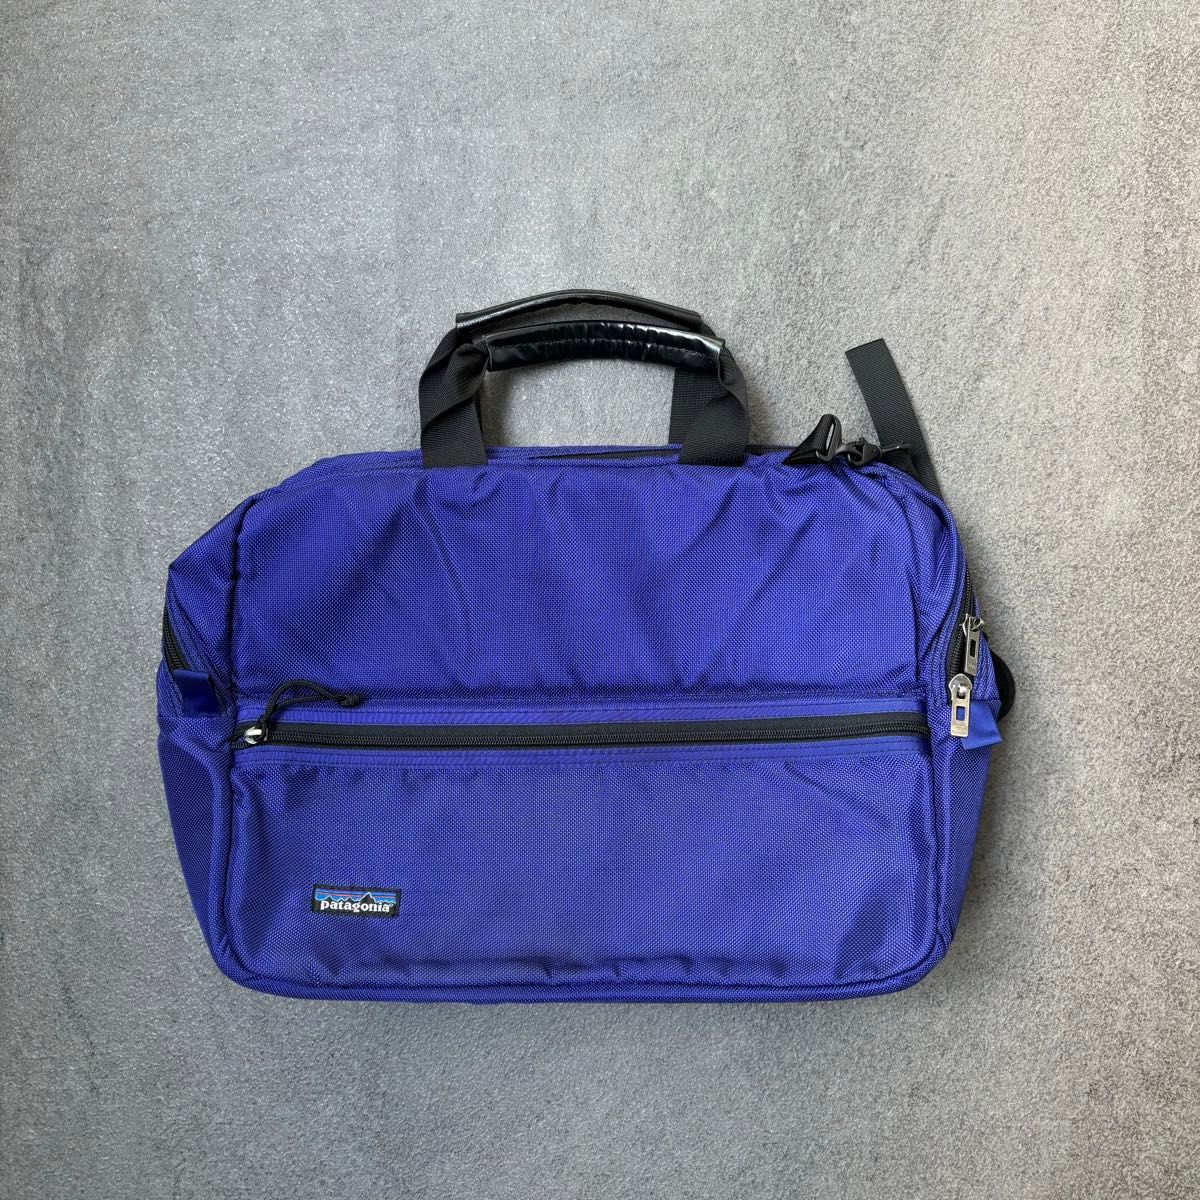 USED ユーズド　Patagonia 90s USA製　カバン　鞄　バッグ